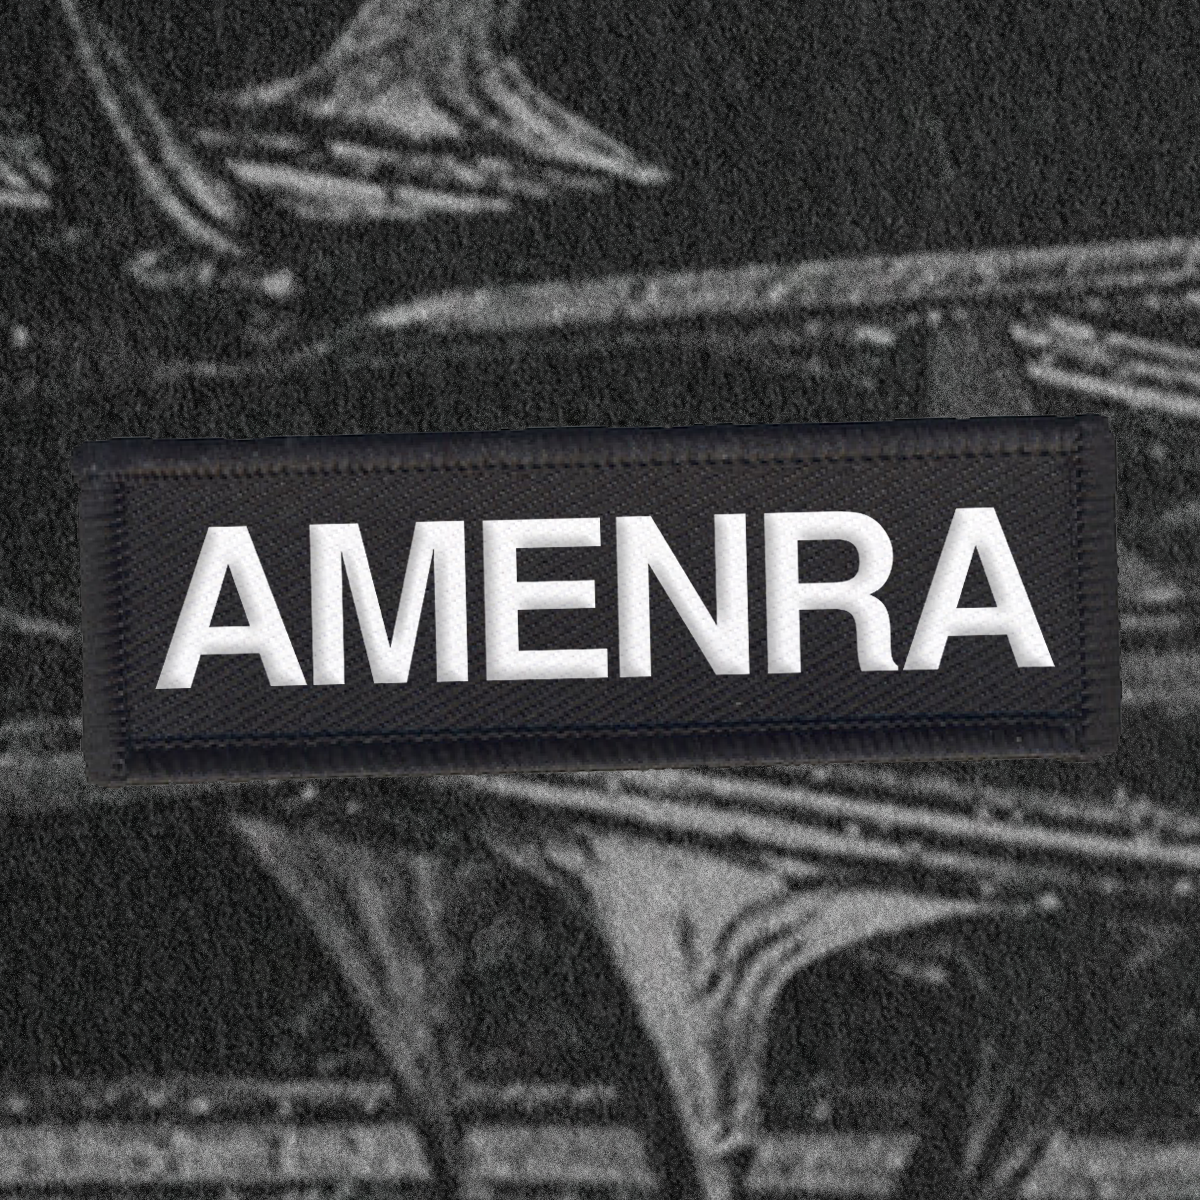 AMENRA "LOGO" EMBROIDERED PATCH